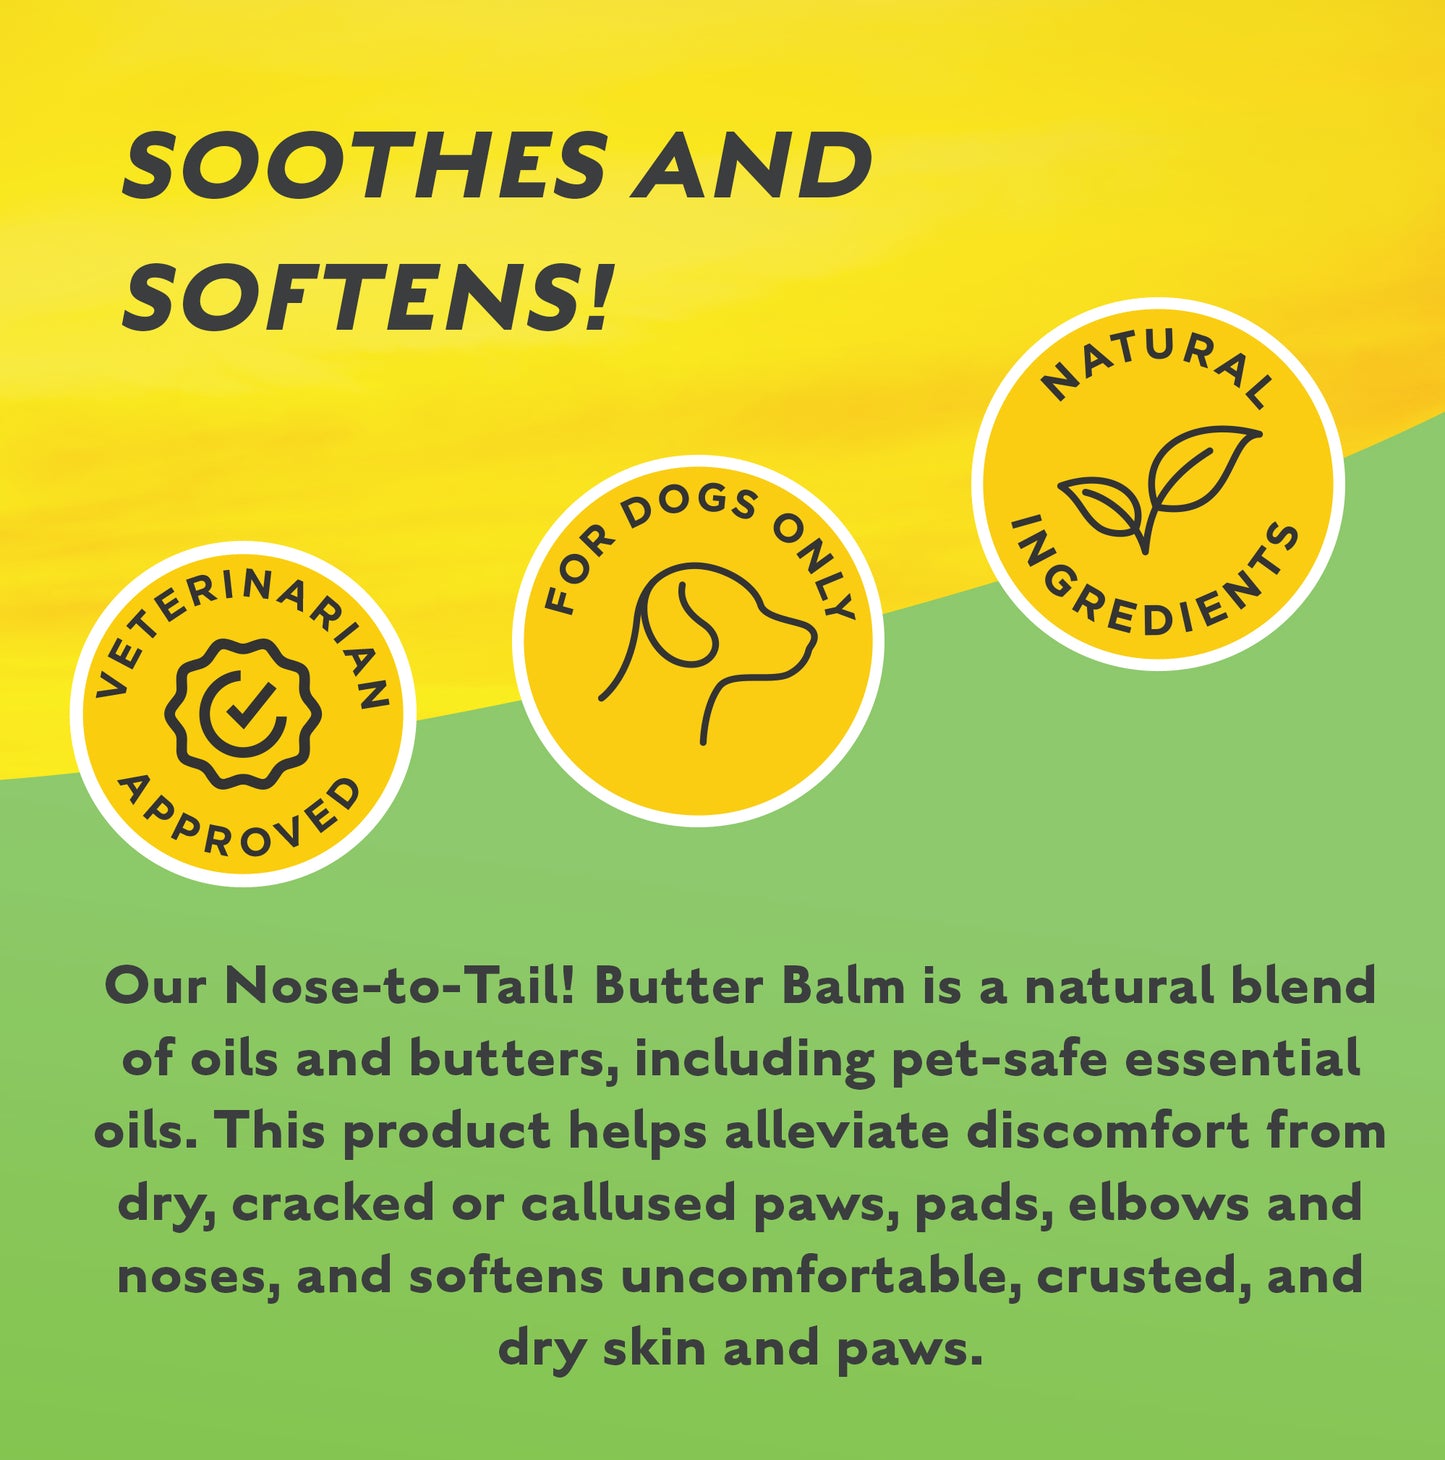 ALLERGY/SKIN- Nose-To-Tail! Butter Balm